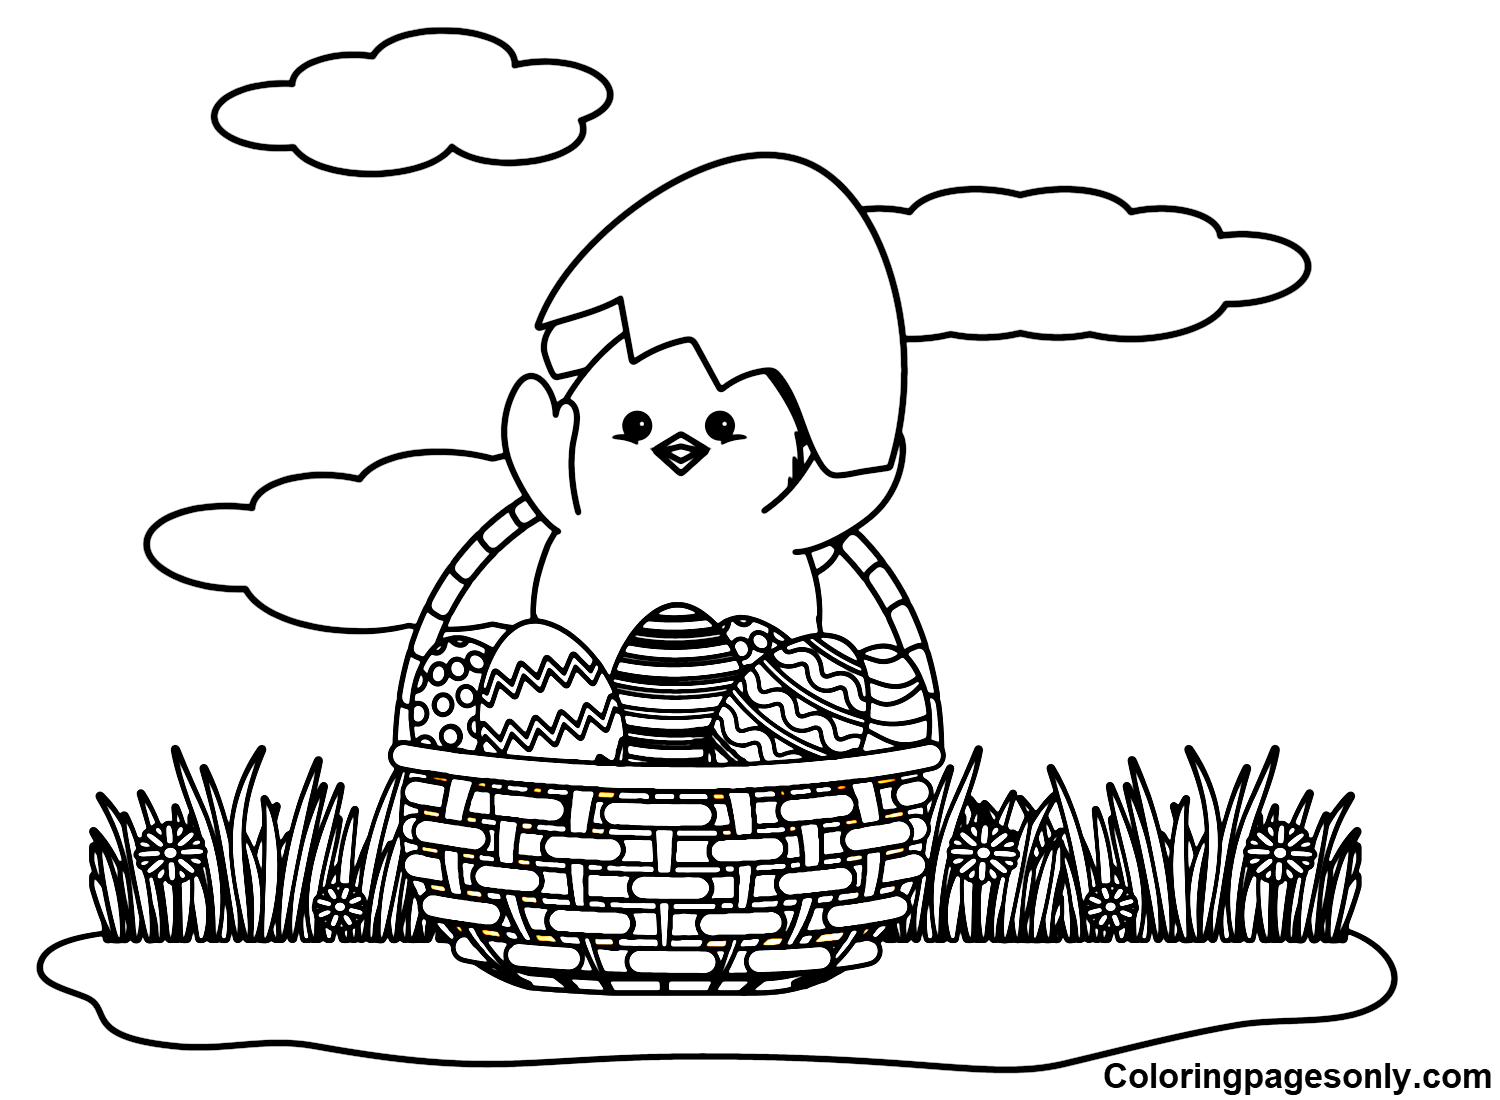 Adorable Chick Easter Coloring Page